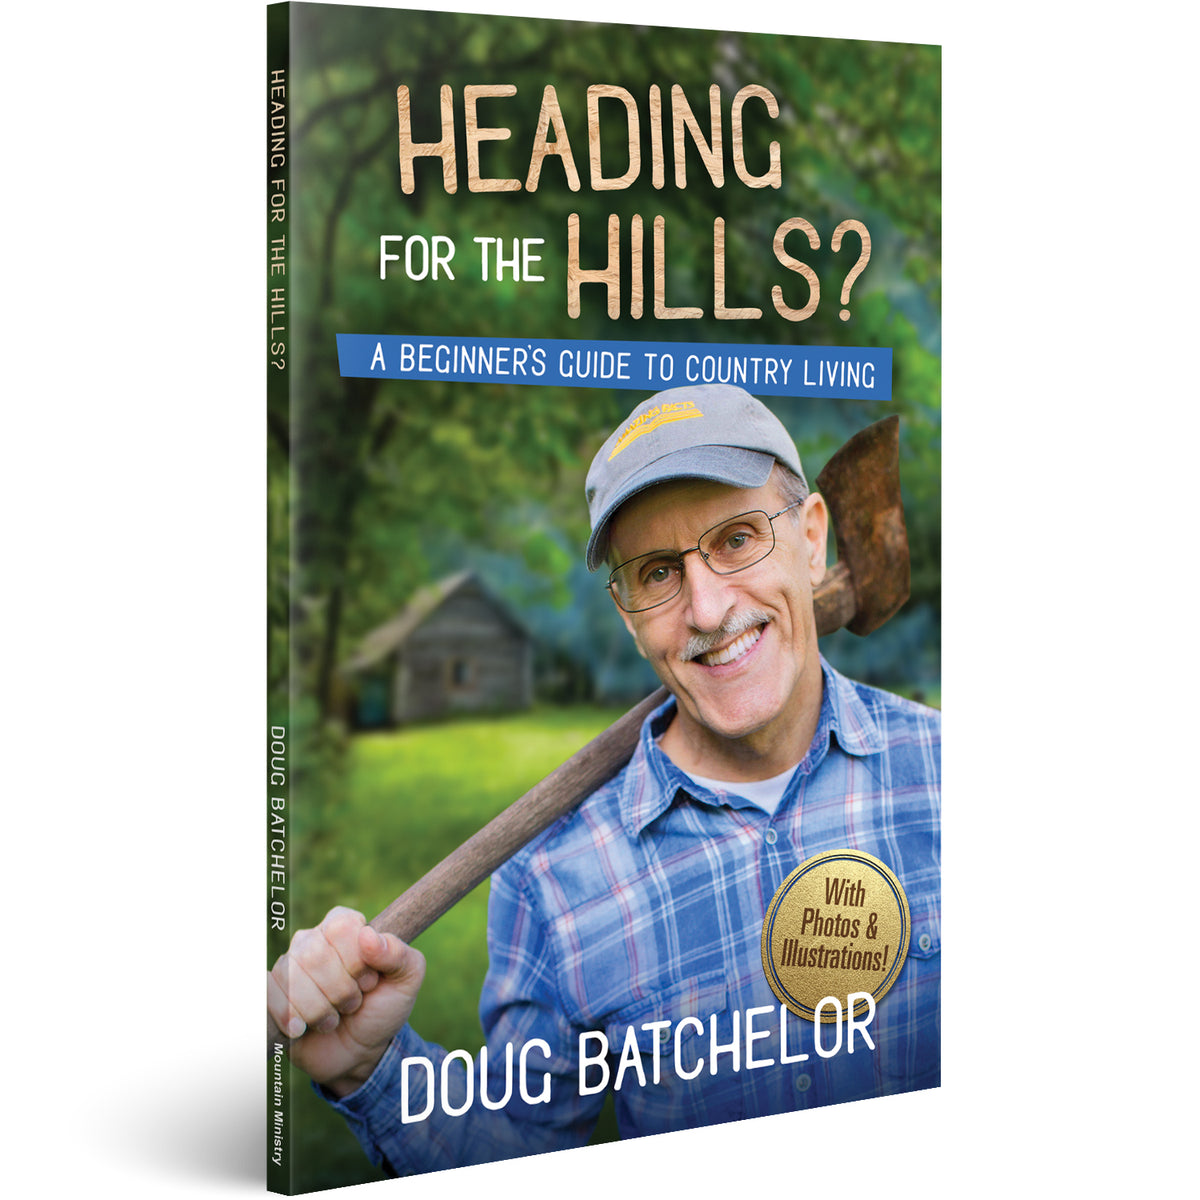 Heading for the Hills: A Beginner's Guide to Country Living by Doug Batchelor